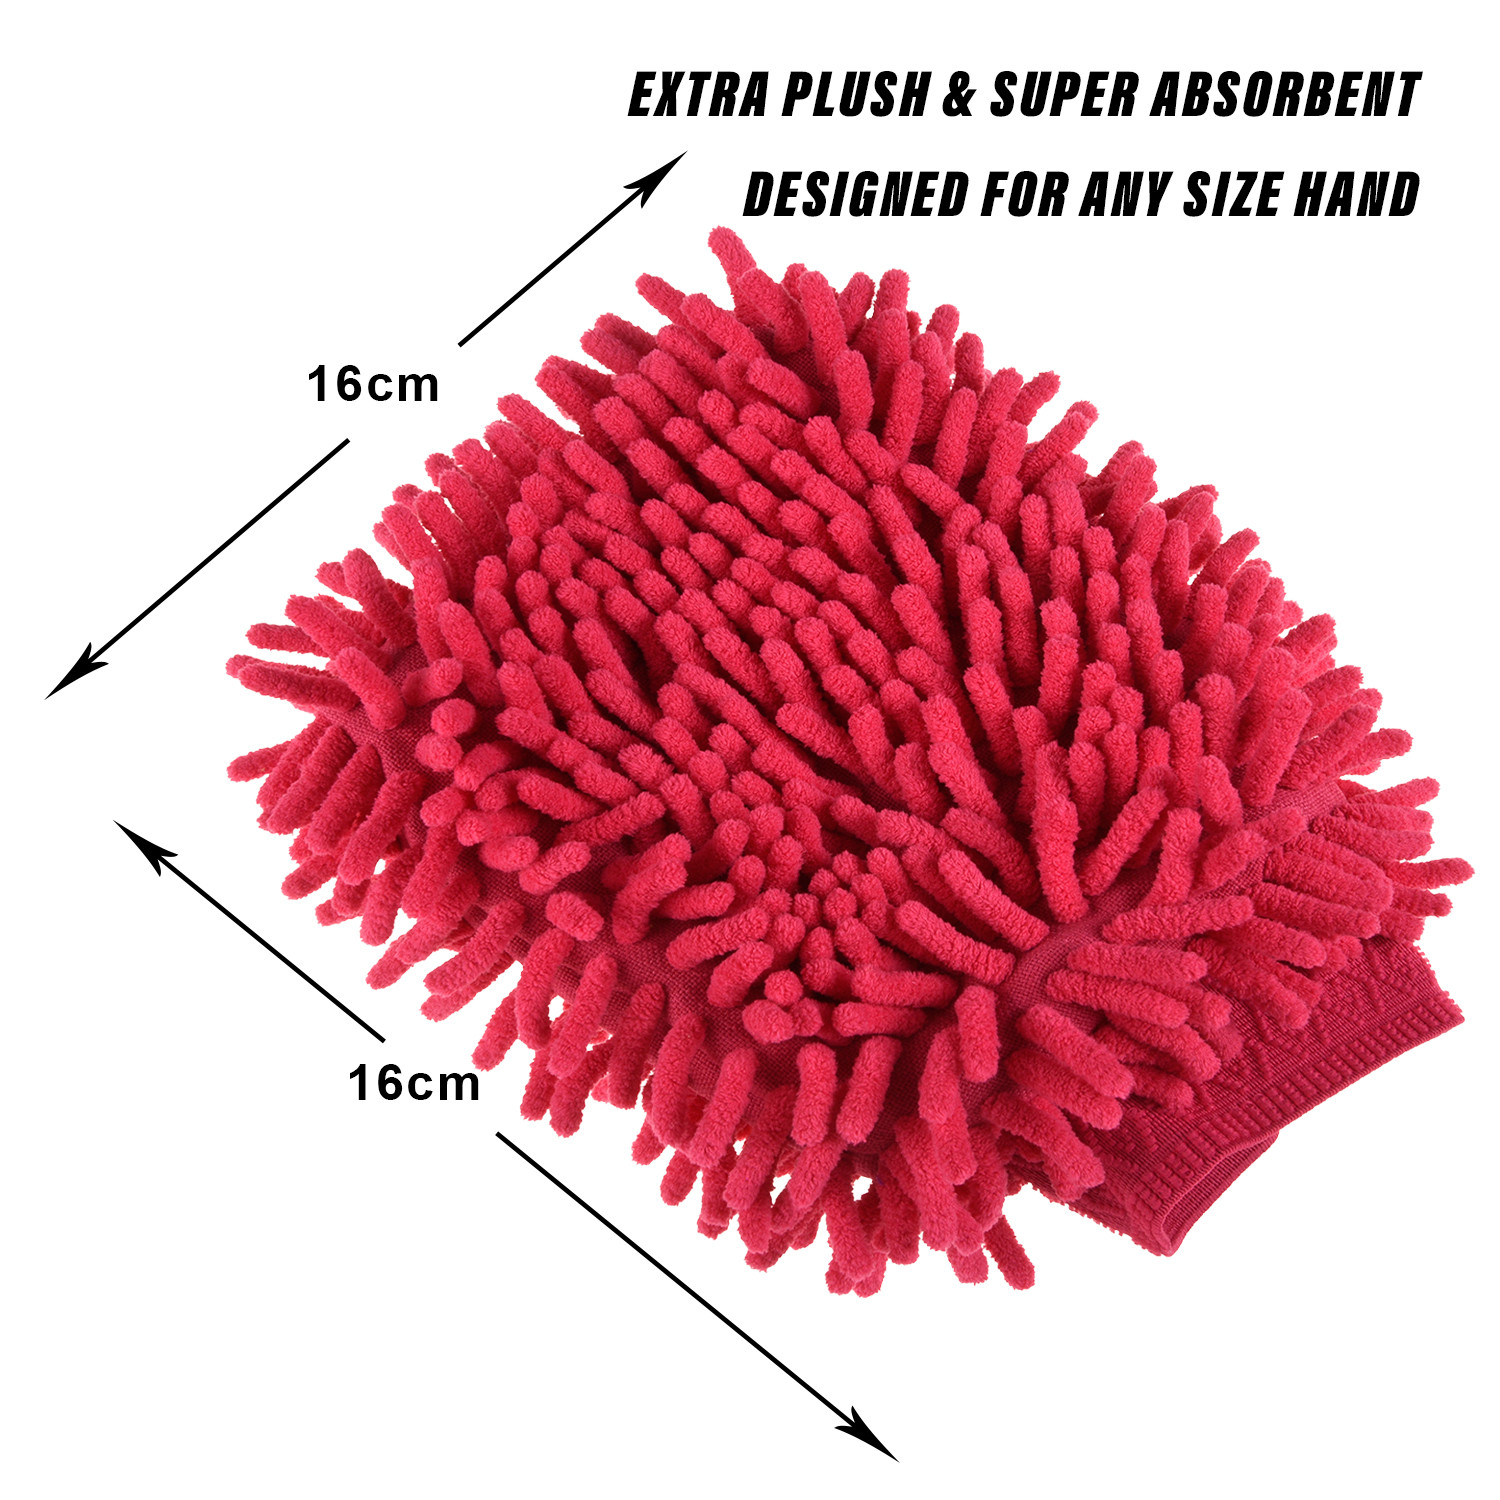 Kuber Industries Chenille Mitts|Microfiber Cleaning Gloves|Inside Waterproof Cloth Gloves|100 Gram Weighted Hand Duster|Chenille Gloves For Car|Glass|Pack of 2 (Red & Dark Pink)